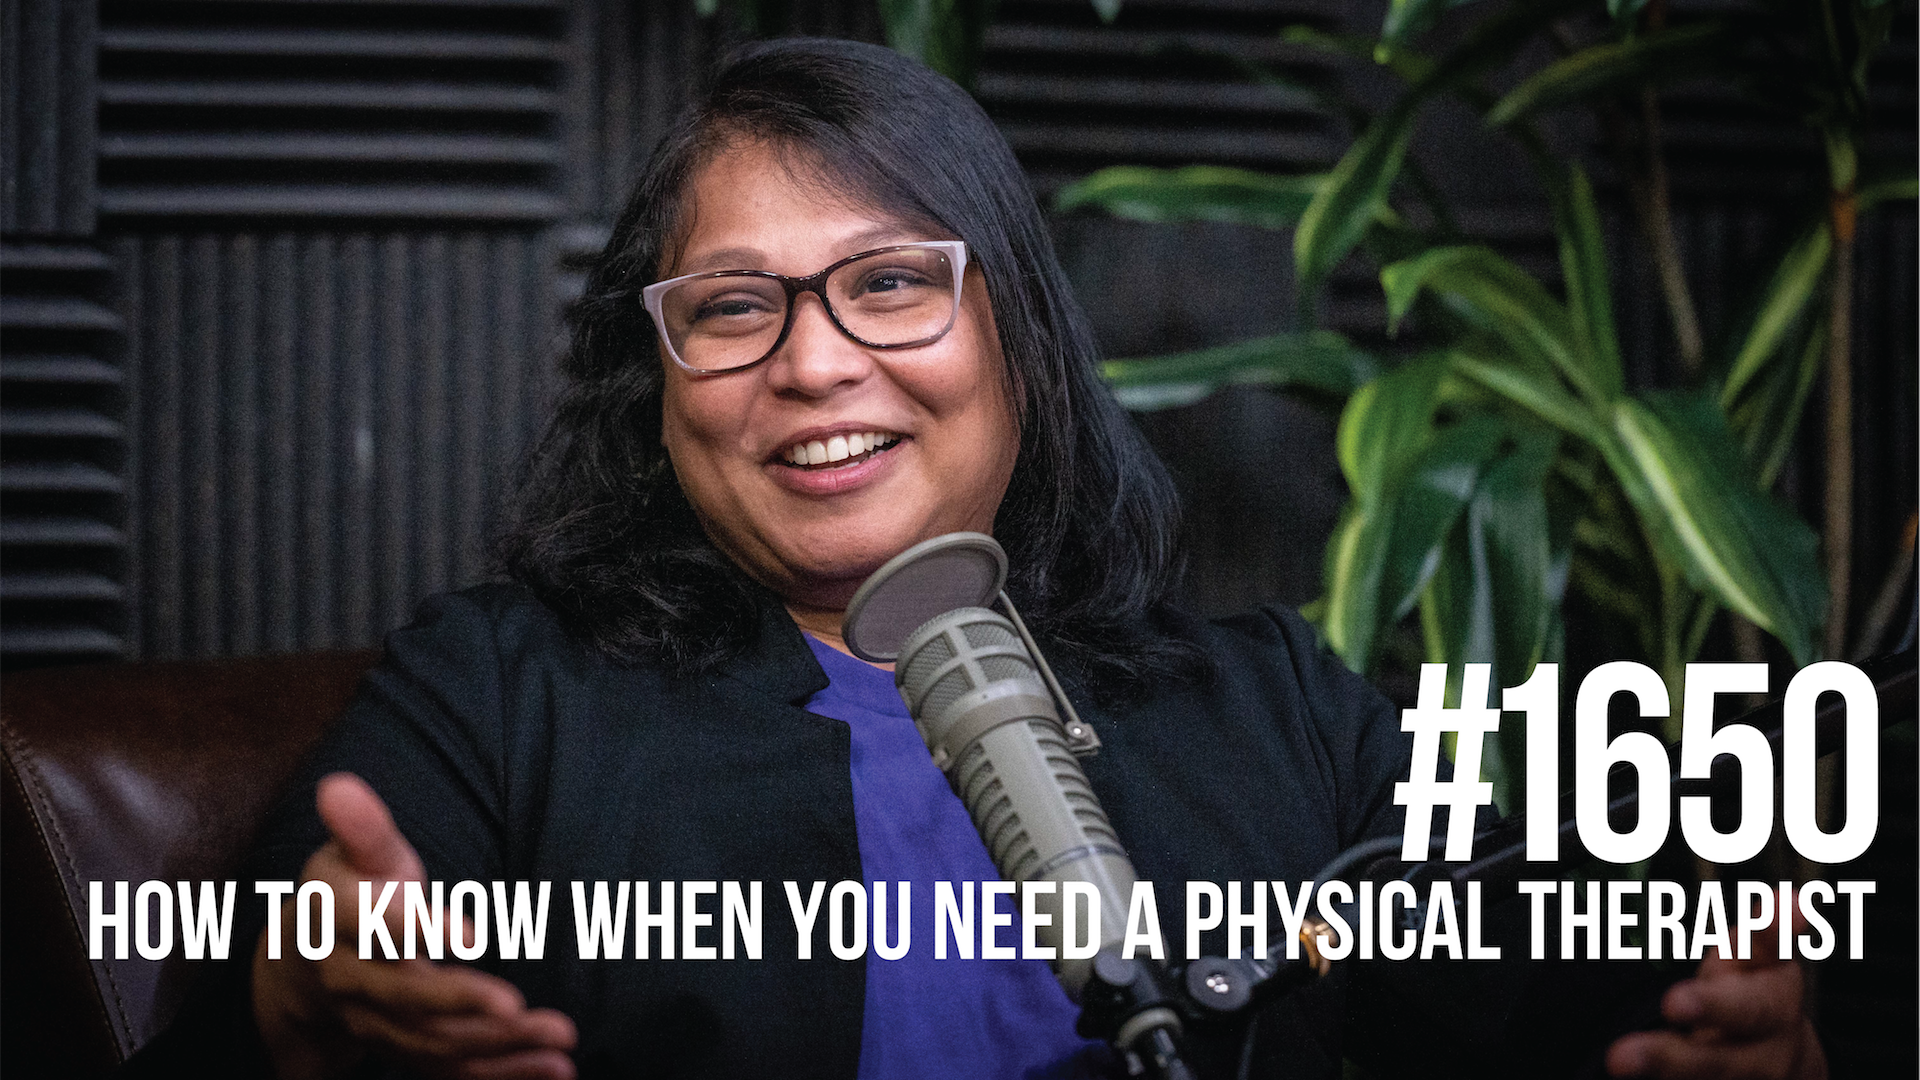 1650: How to Know When You Need a Physical Therapist